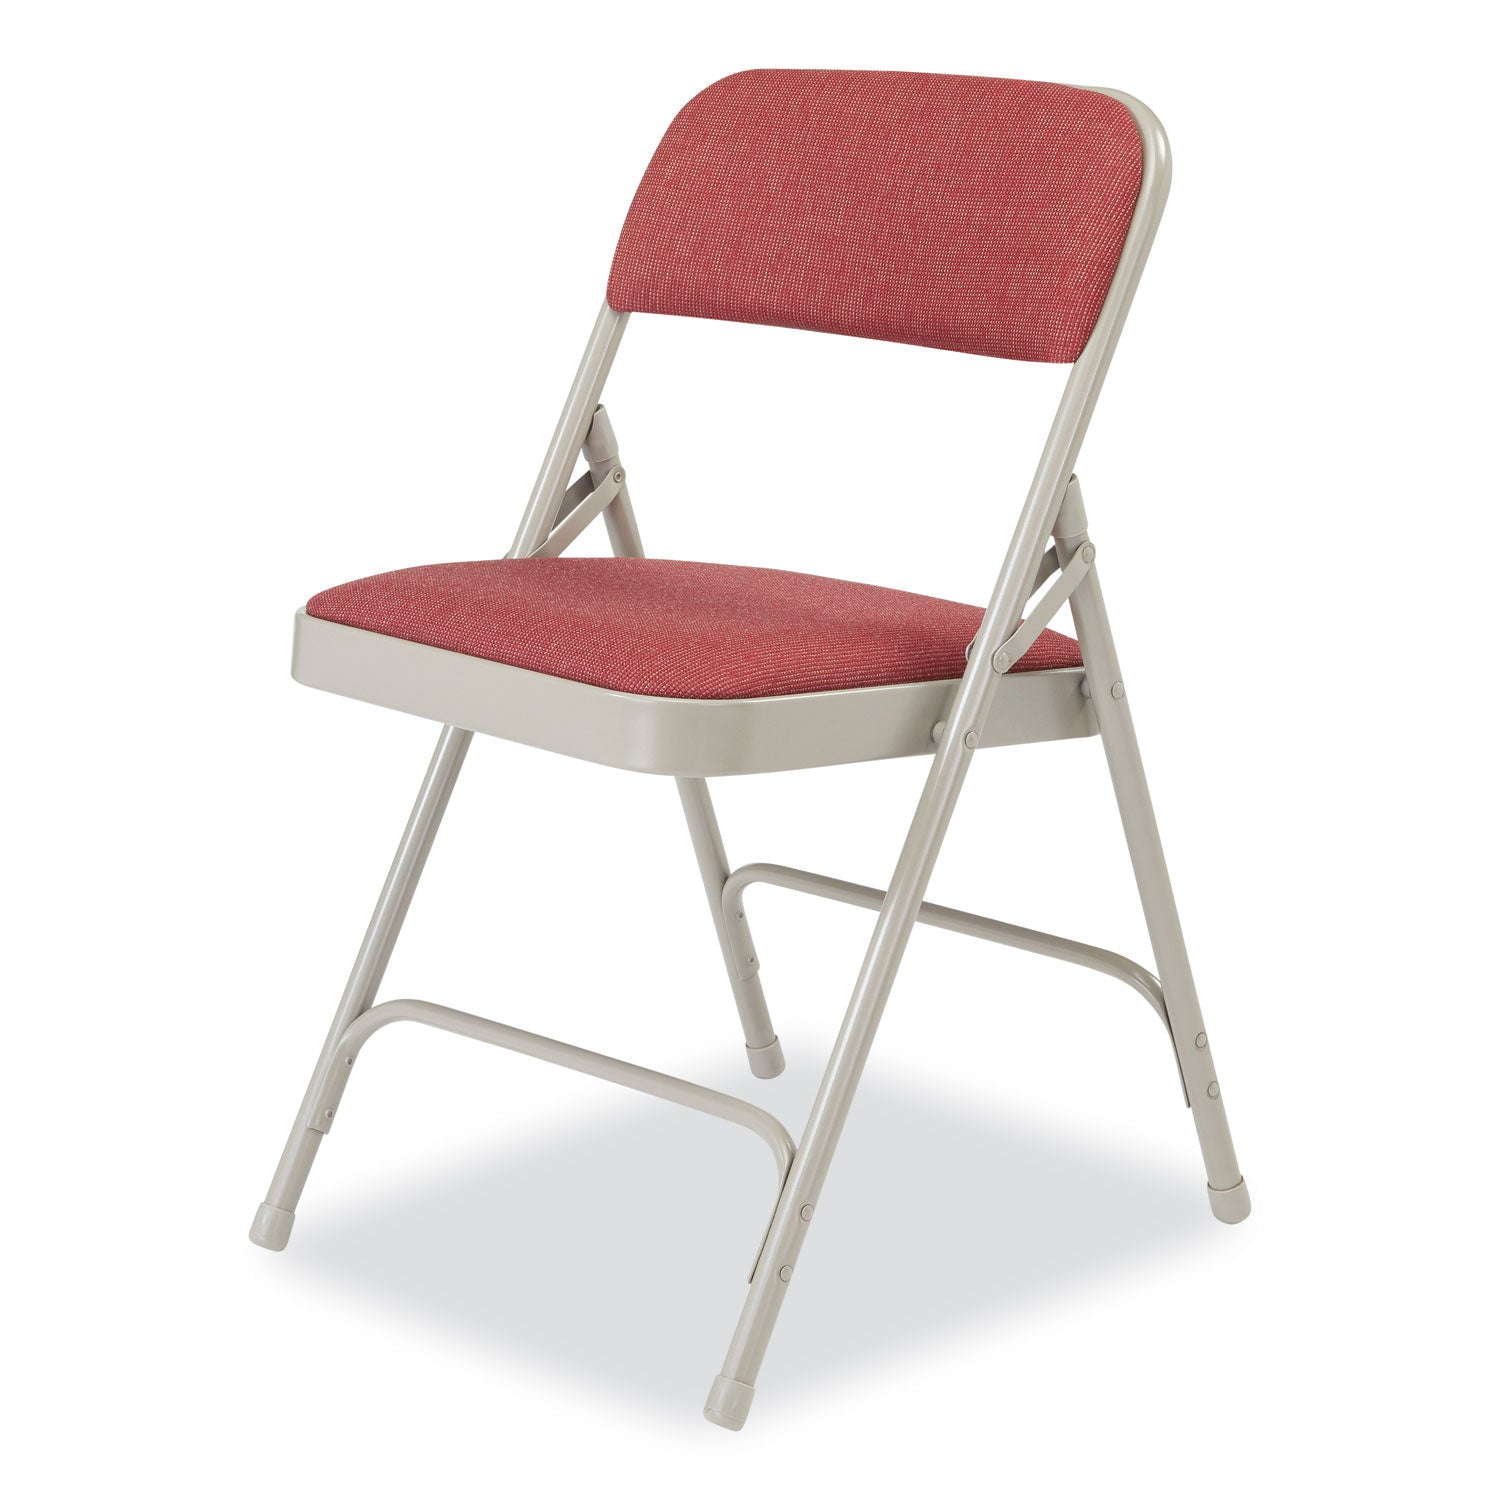 2200-series-fabric-dual-hinge-premium-folding-chair-supports-500lb-cabernet-seat-backgray-base4-ct-ships-in-1-3-bus-days_nps2208 - 3